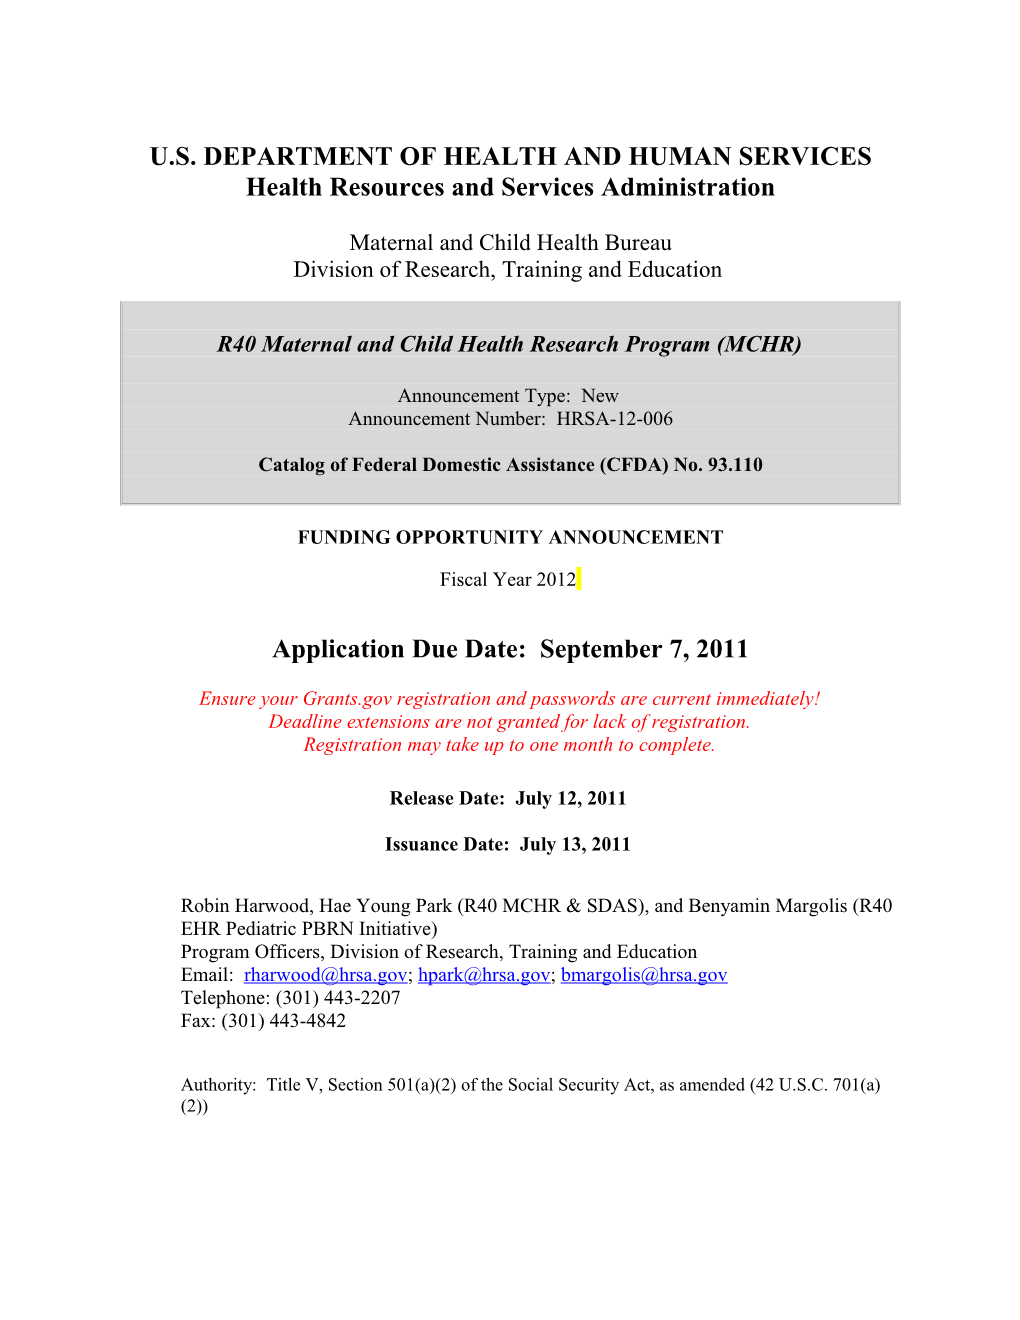 Funding Opportunity Announcement HRSA-12-006